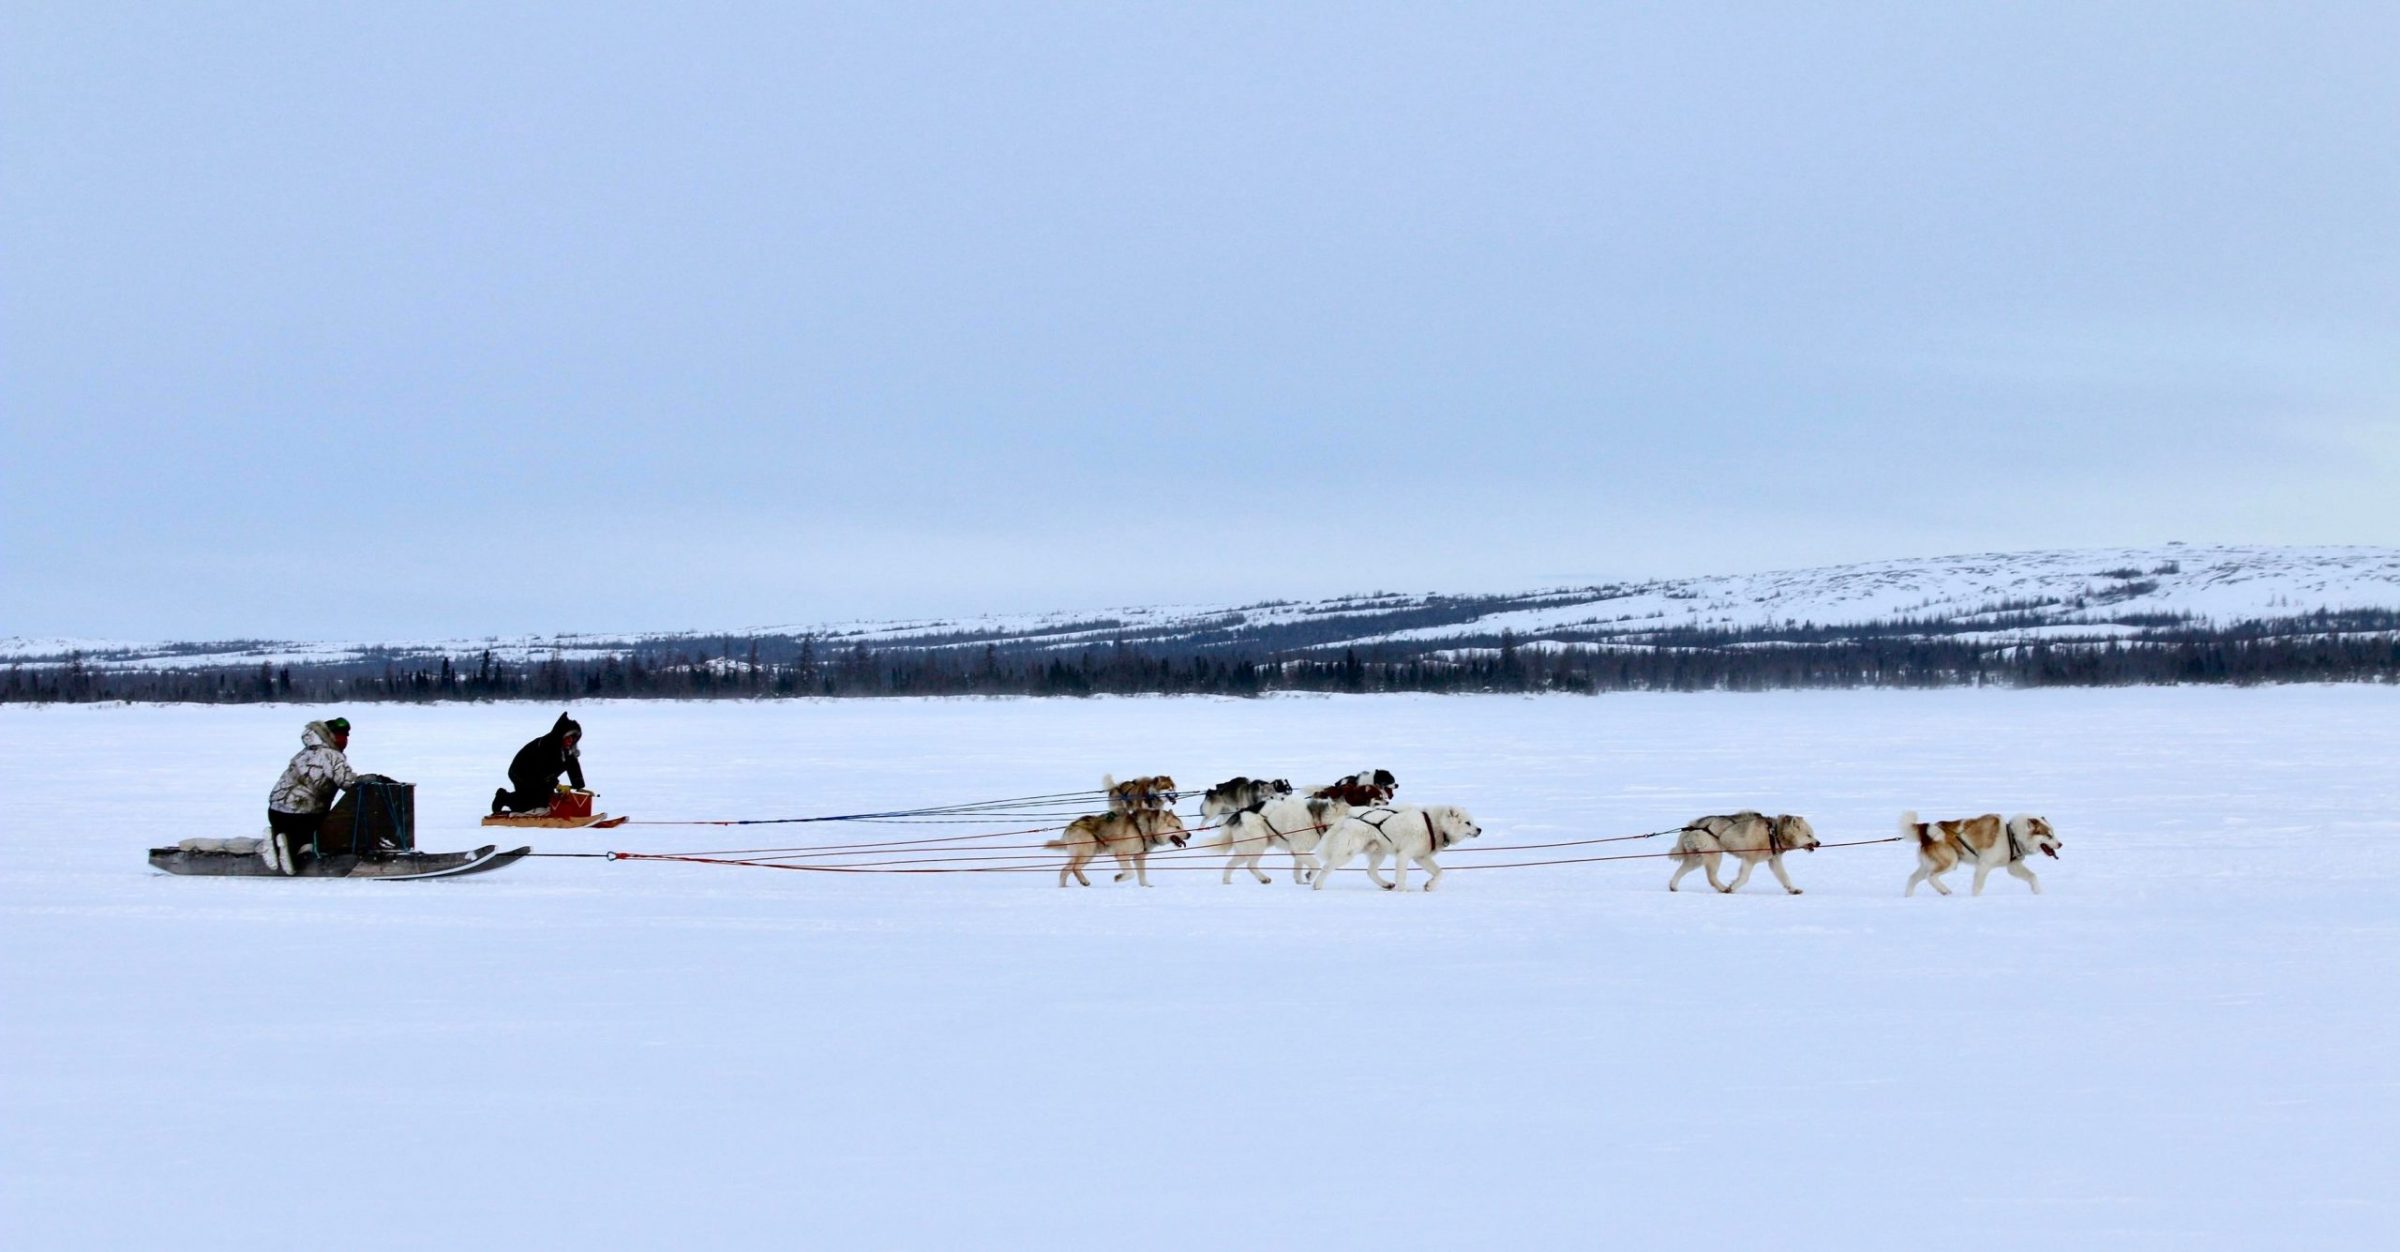 George Kauki, left, and Michael Gordon compete in a dogsled race organized by the Kuujjuaq Sivulirqtisait Youth Committee on Jan. 3. Kauki placed first in the race, which saw four competitors follow a loop around Stewart Lake. (Photo by Malaya Qaunirq Chapman)